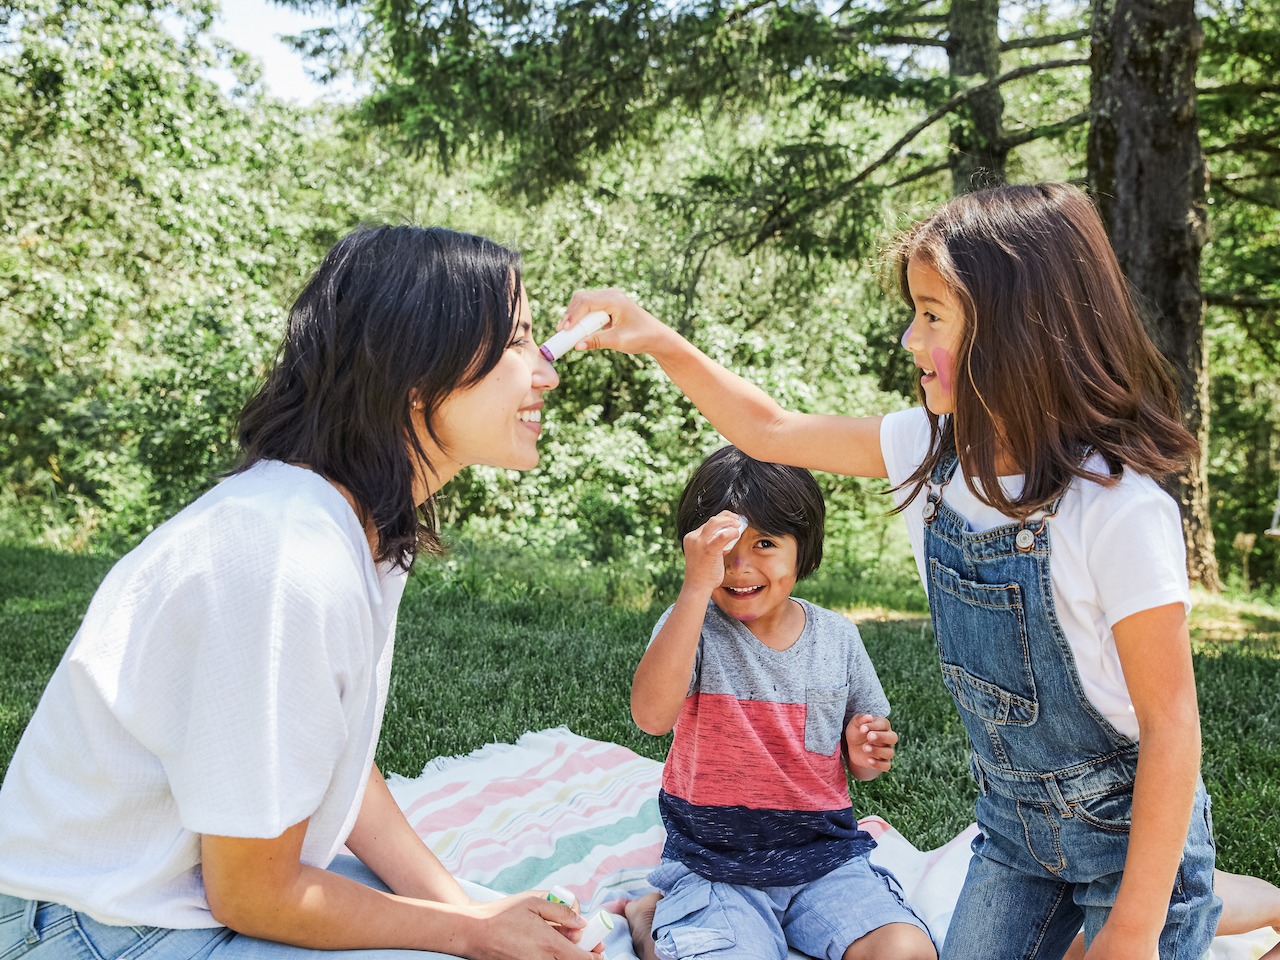 Image of girl putting sunscreen stick on adult woman's face with young boy in background